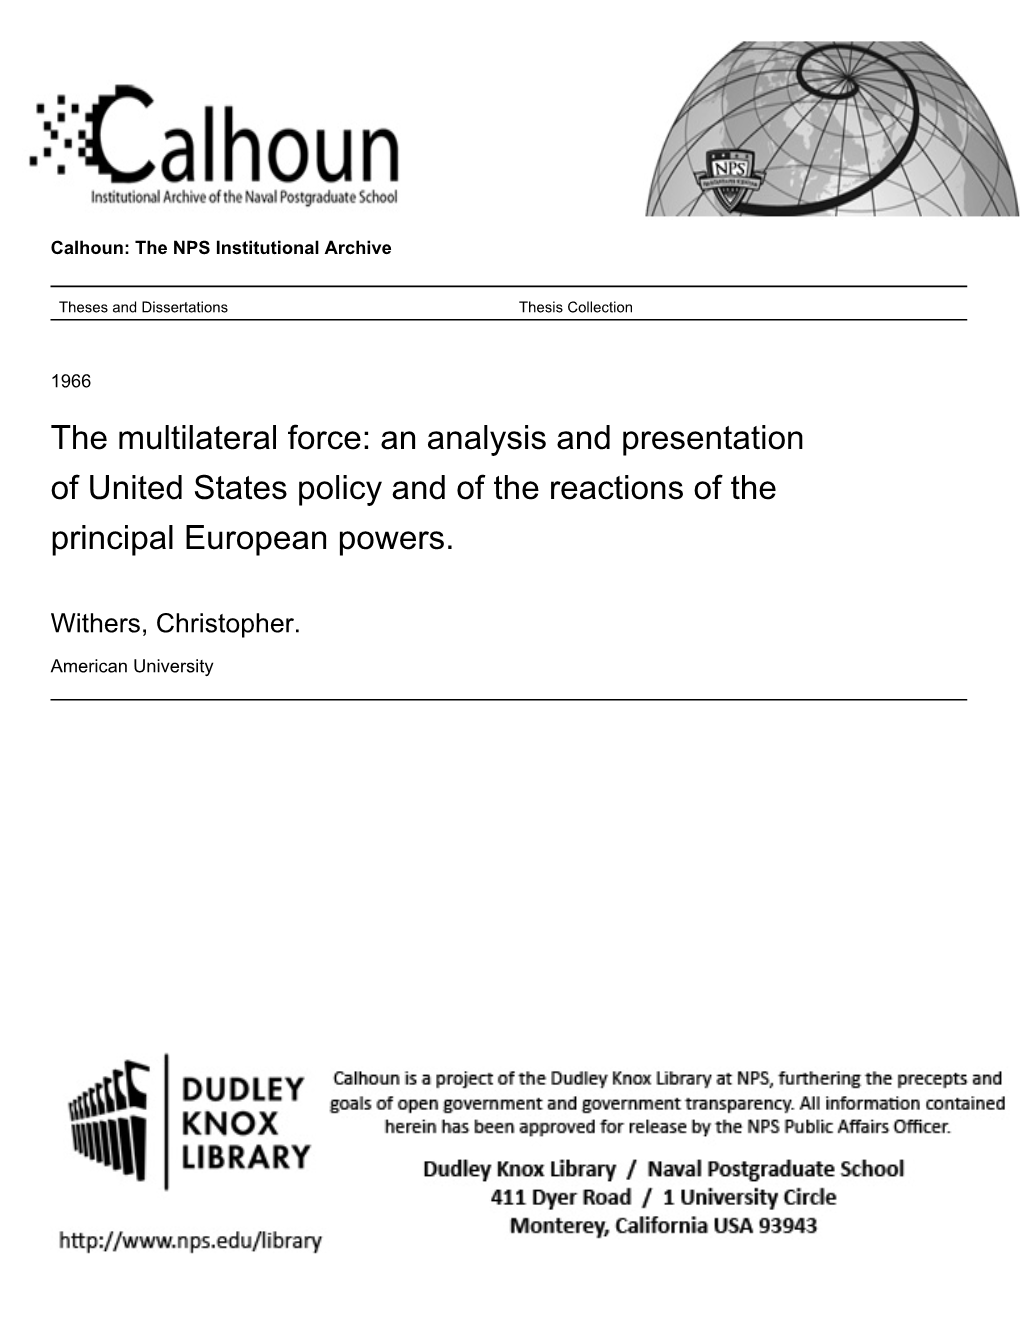 The Multilateral Force: an Analysis and Presentation of United States Policy and of the Reactions of the Principal European Powers